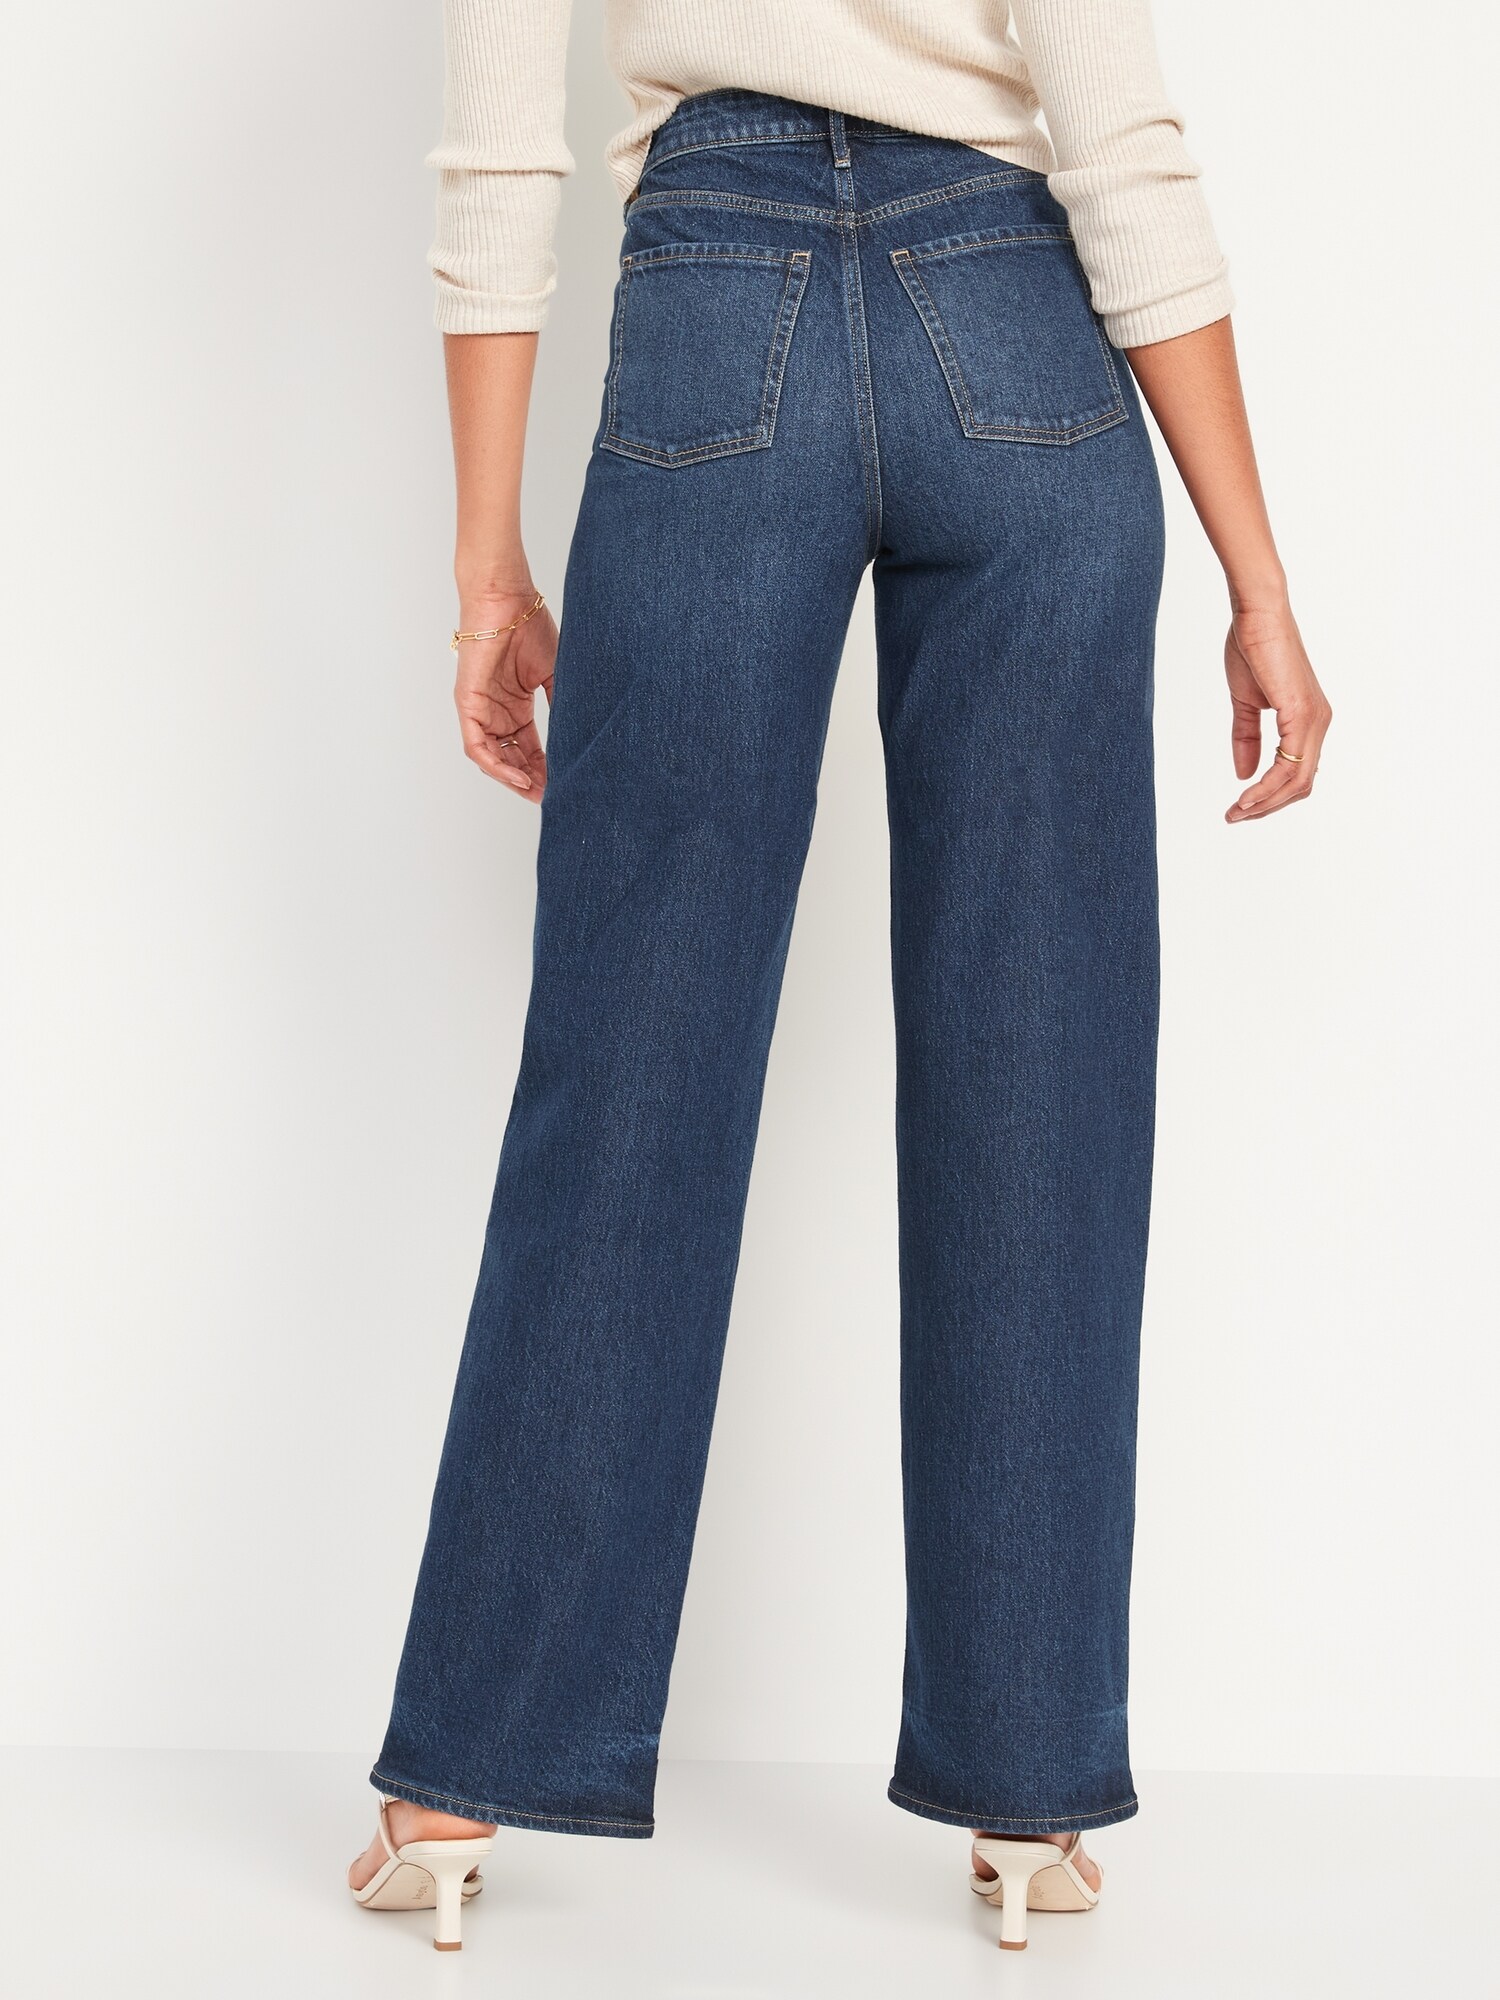 Women Unique High-waisted Raw Hem Ripped Flare Jeans S-XL - 7U23XC617 Size  S - Color Blue_13127